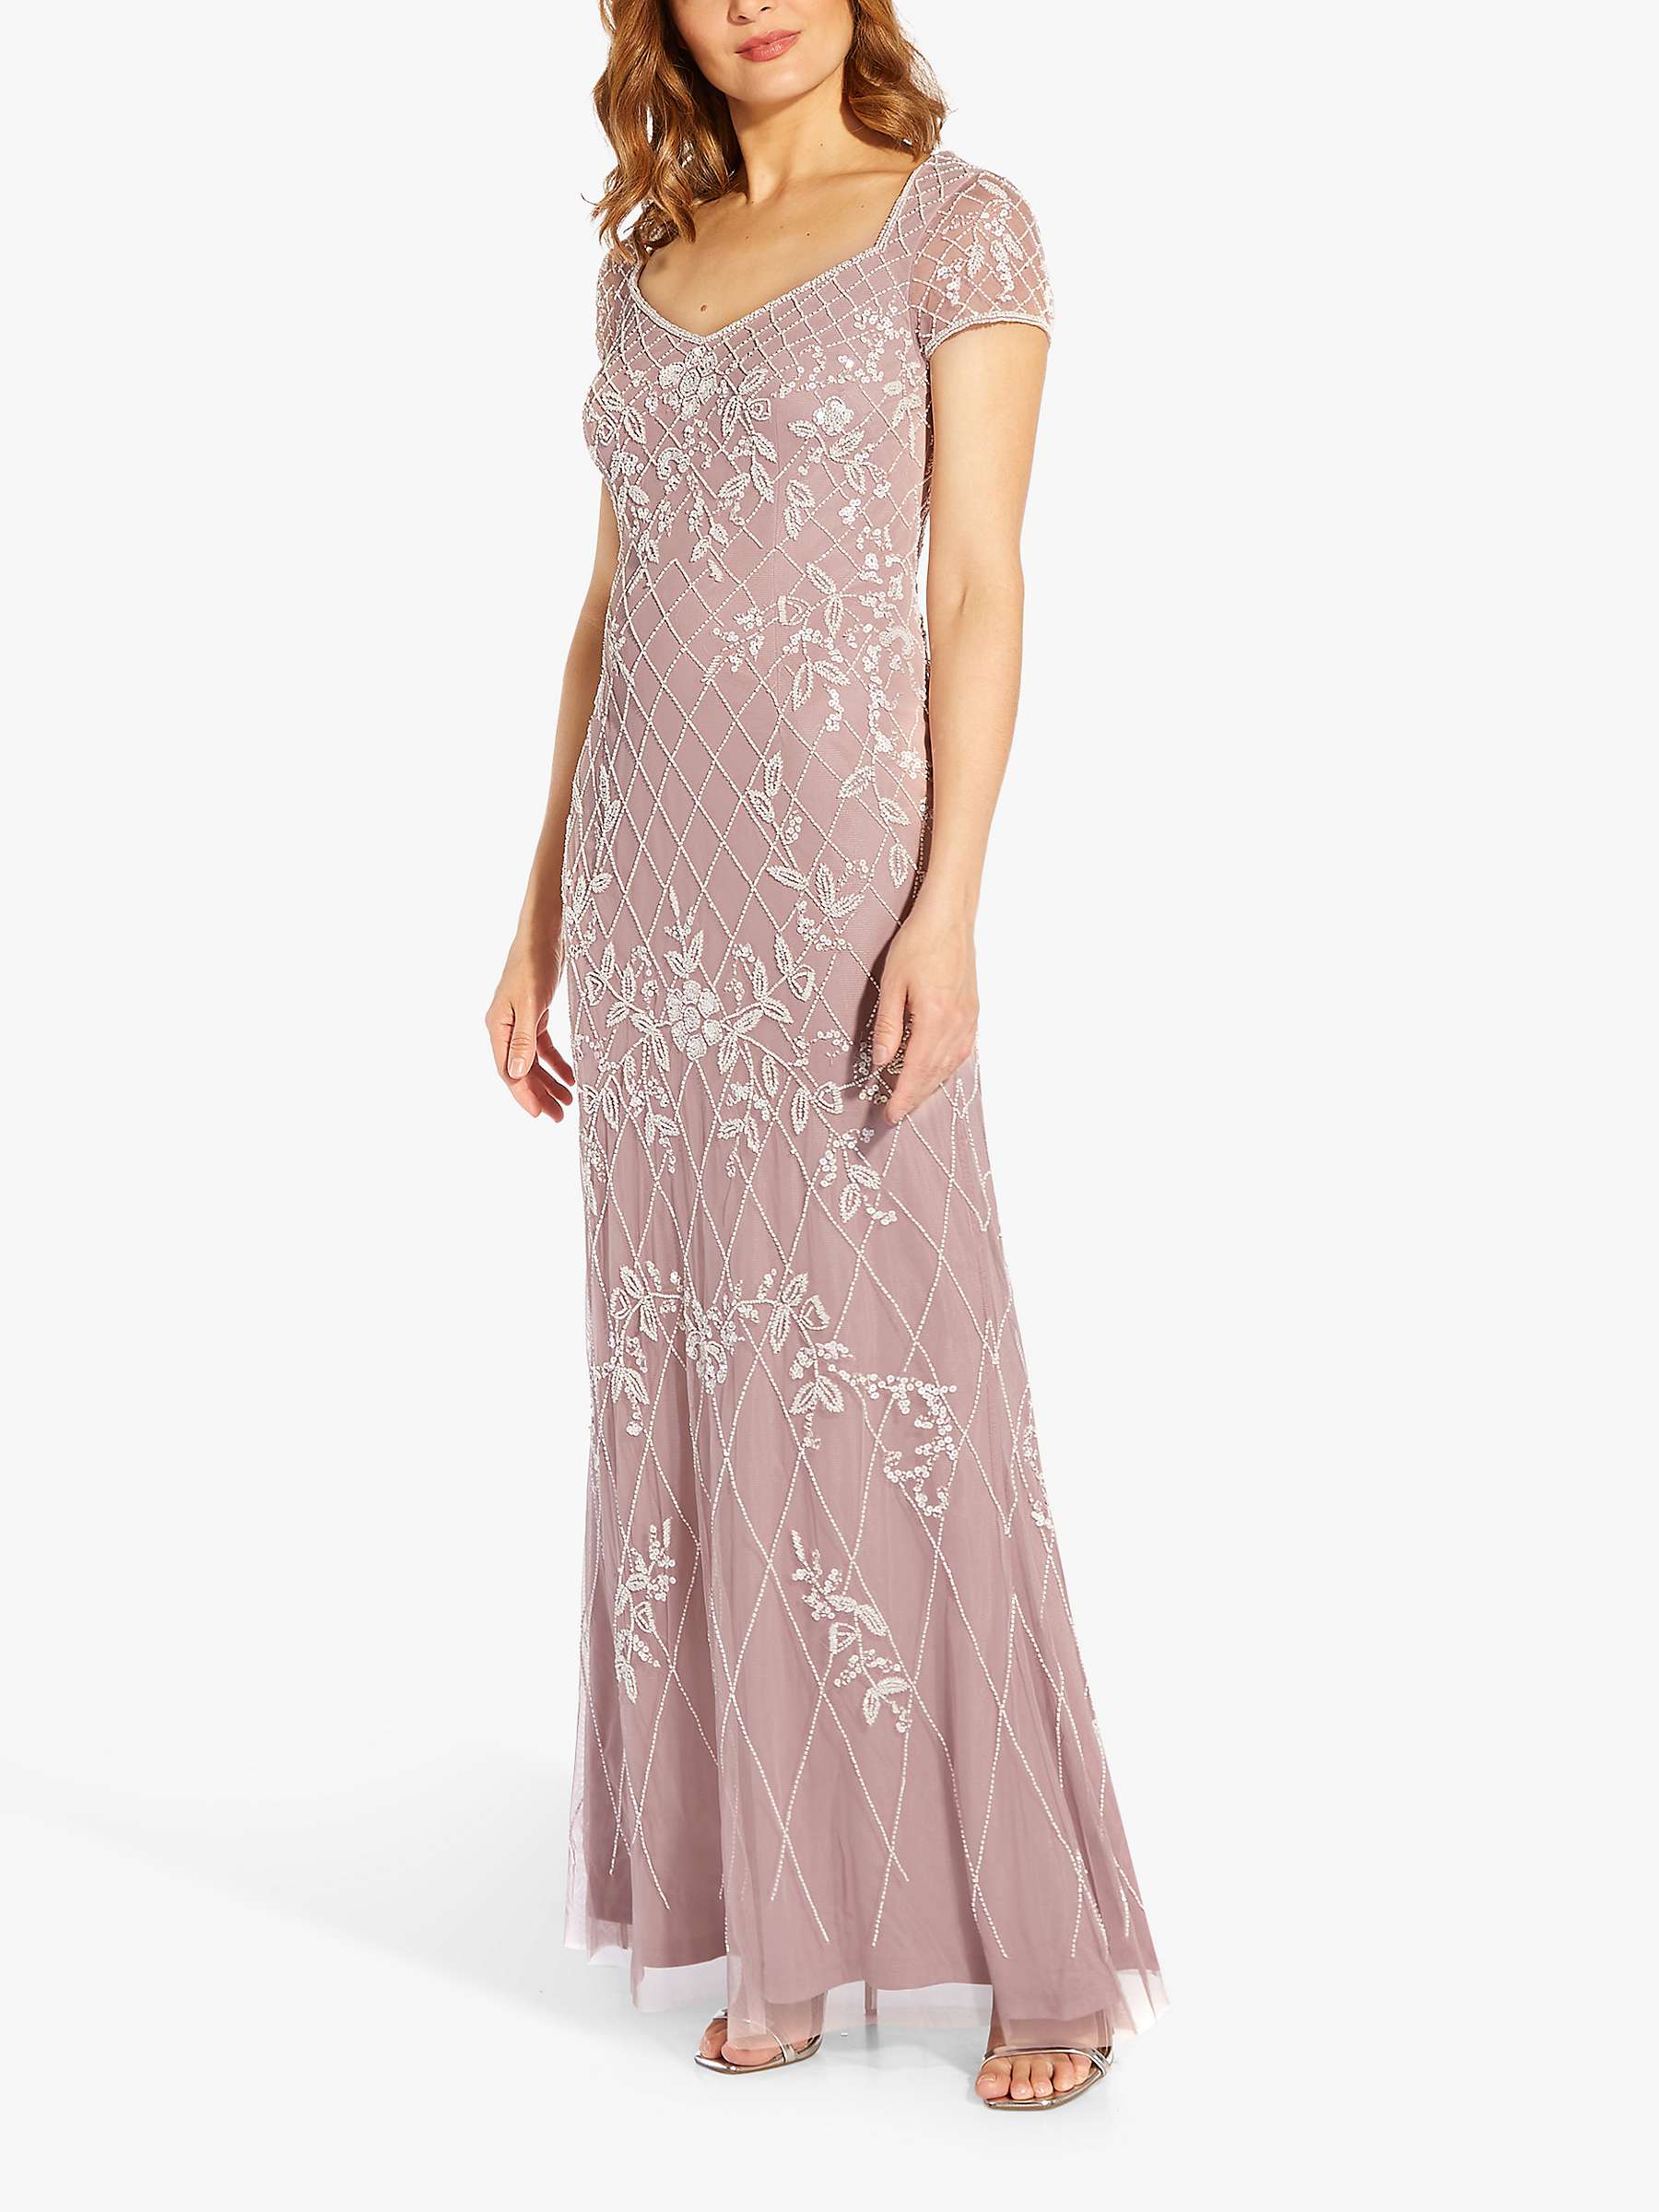 Adrianna Papell Beaded Long Gown ...